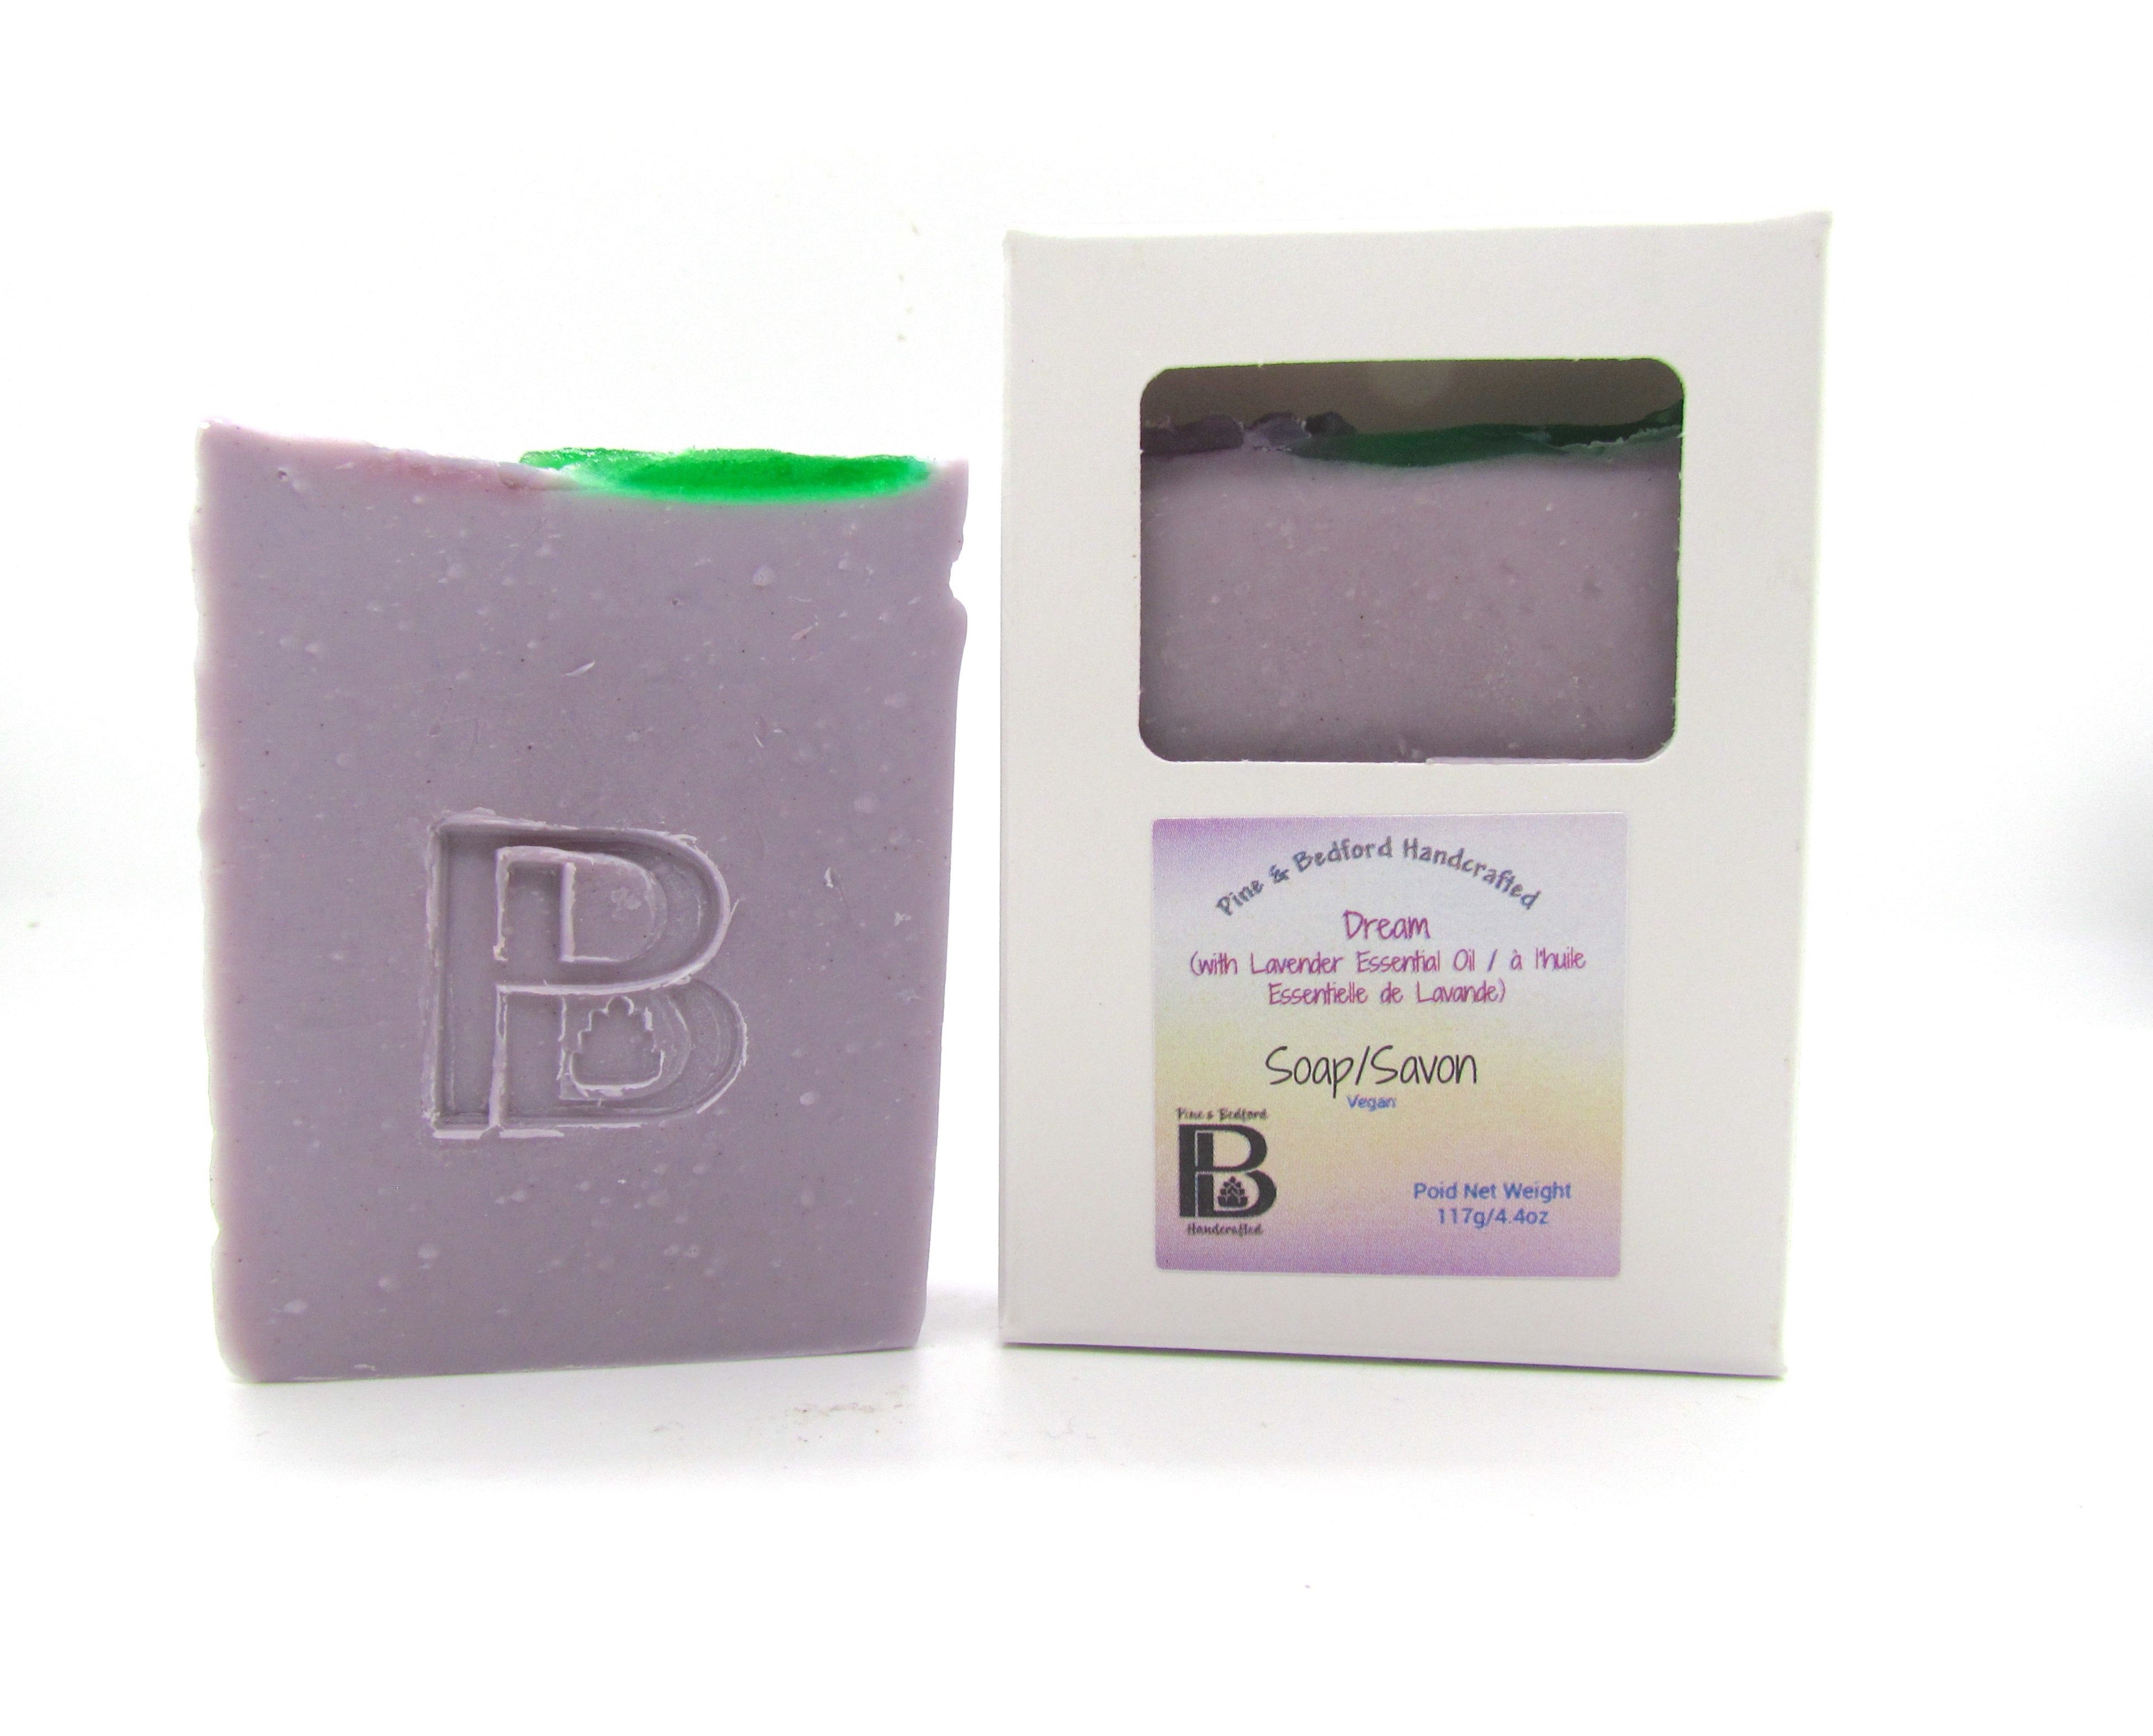 Pine and Bedford's Dream Soap is a cold process soap that is  coloured with Brazilian purple clay and embellished on top with green and purple lavender flowers made from glycerin soap.  Fragranced with Lavender essential oil. Shown here naked and also boxed.